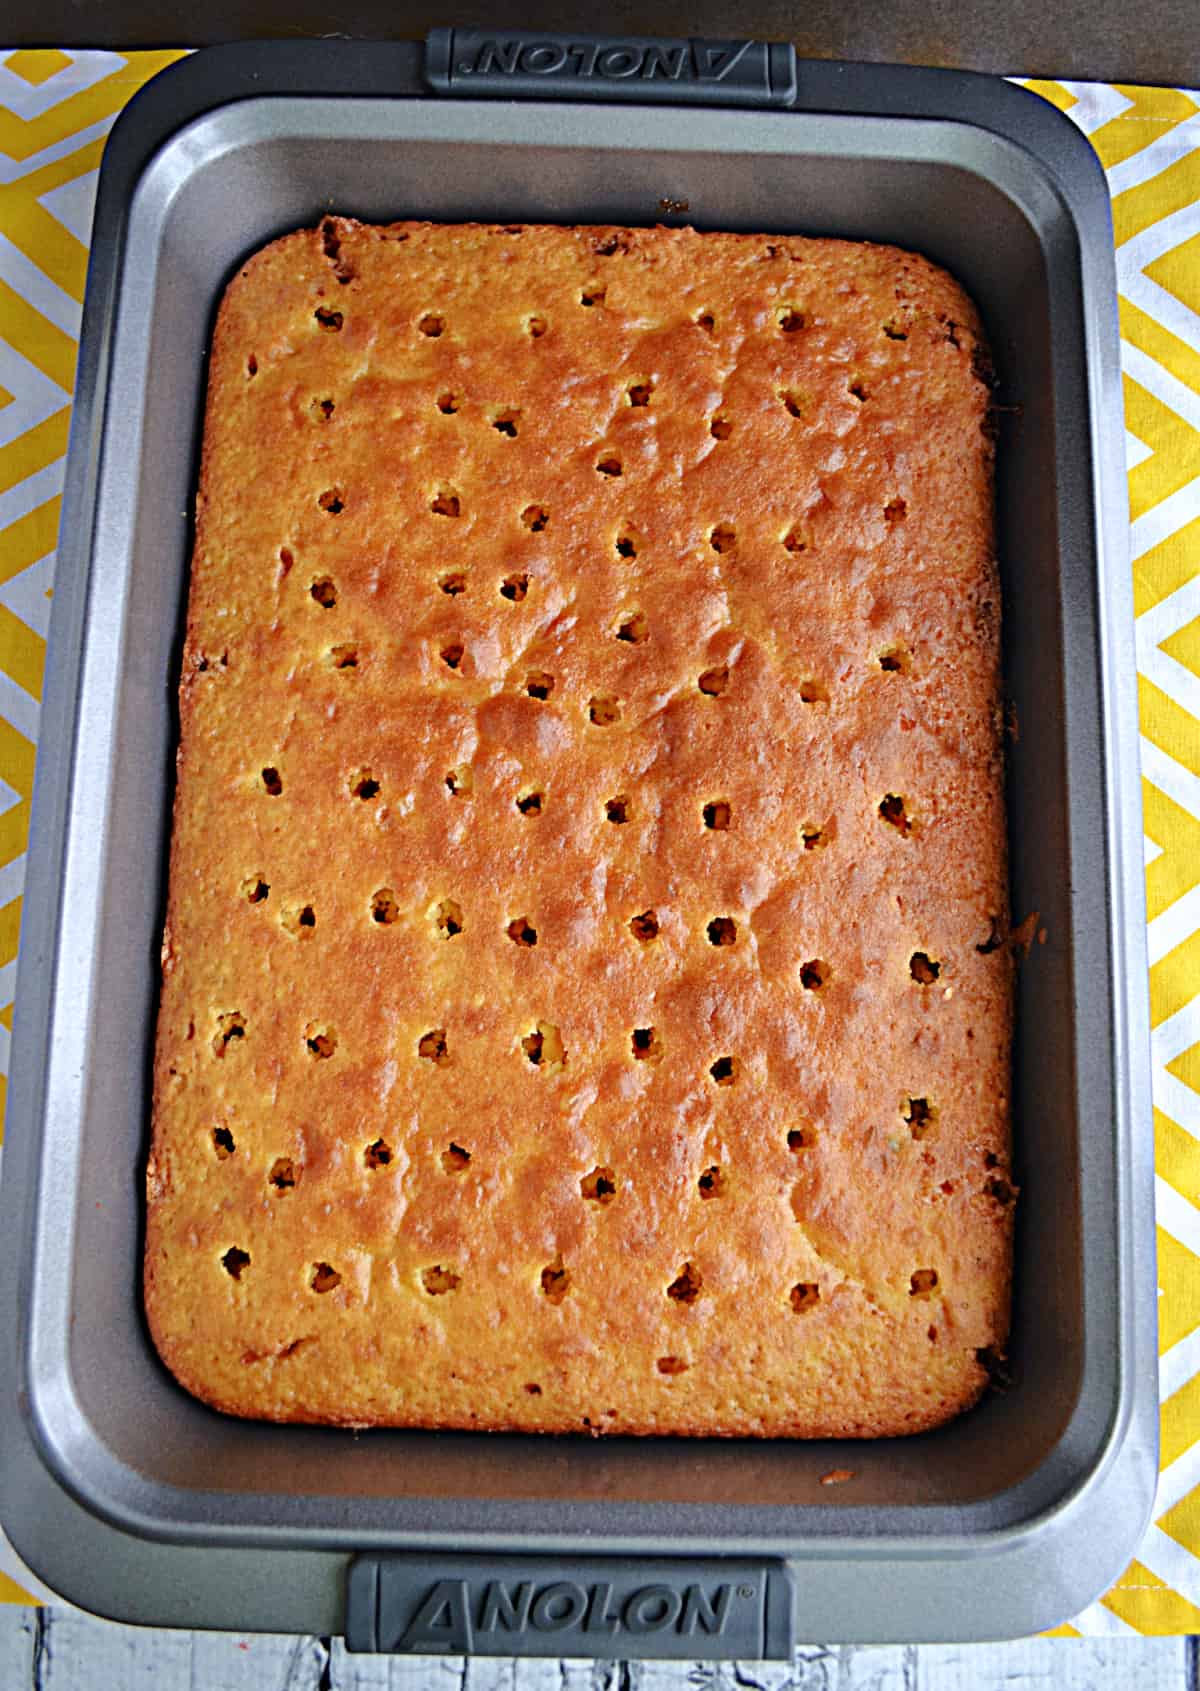 A cake with holes poked in it.